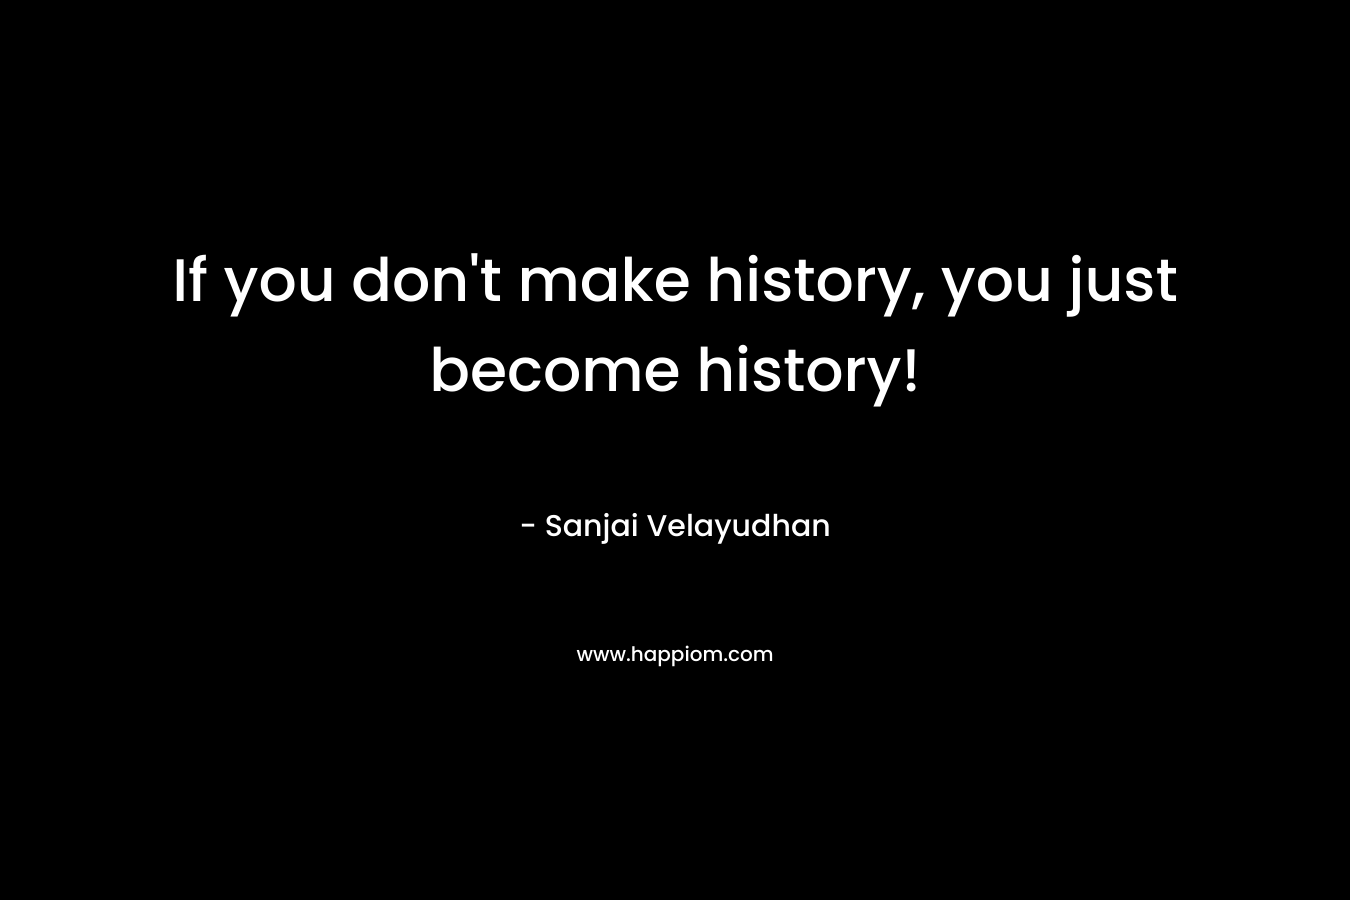 If you don't make history, you just become history!